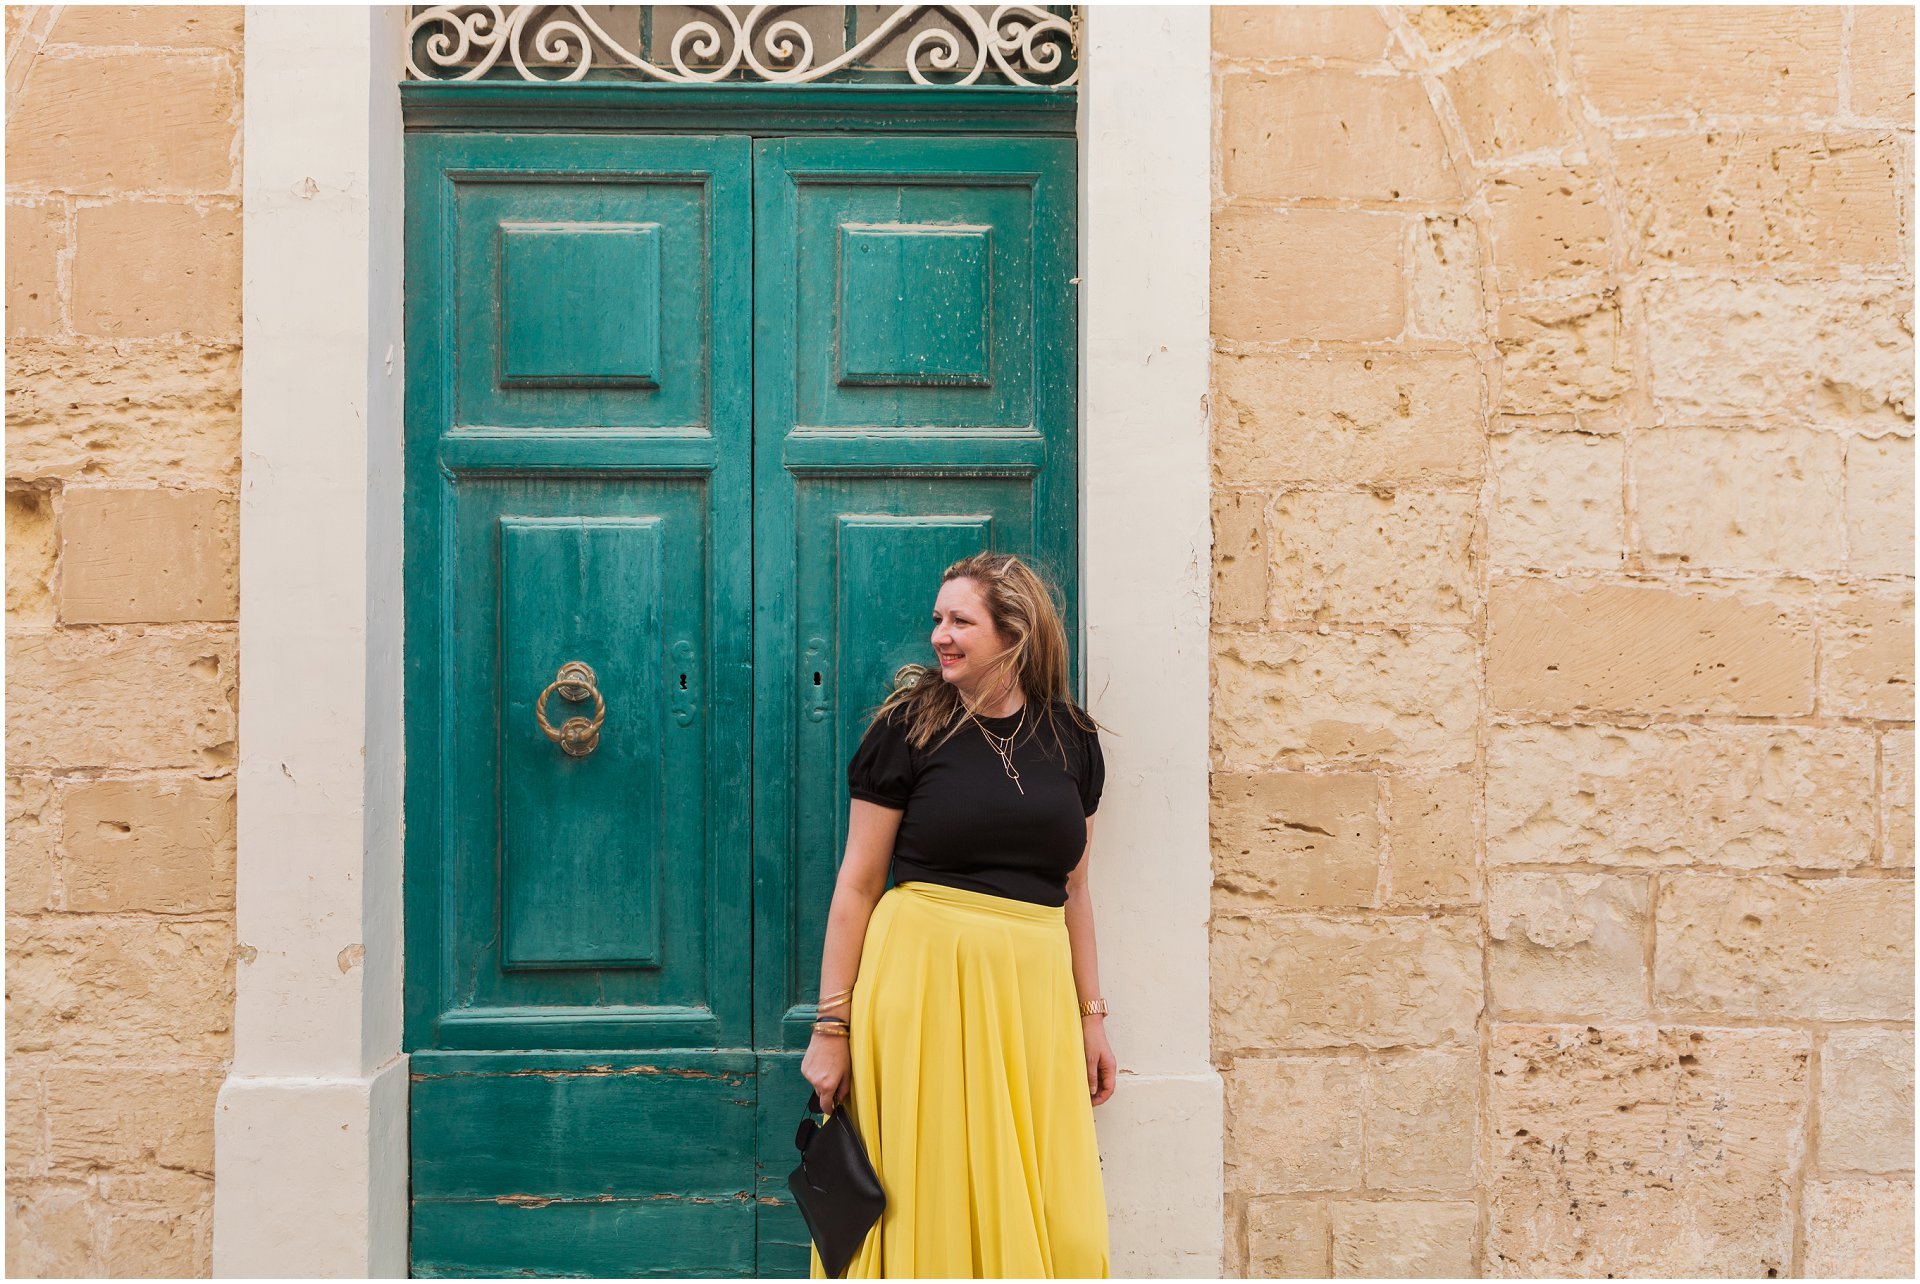 Destination brand portraits with Shelly Shulman Strategy in Malta. Images by London brand photographer AKP Branding Stories